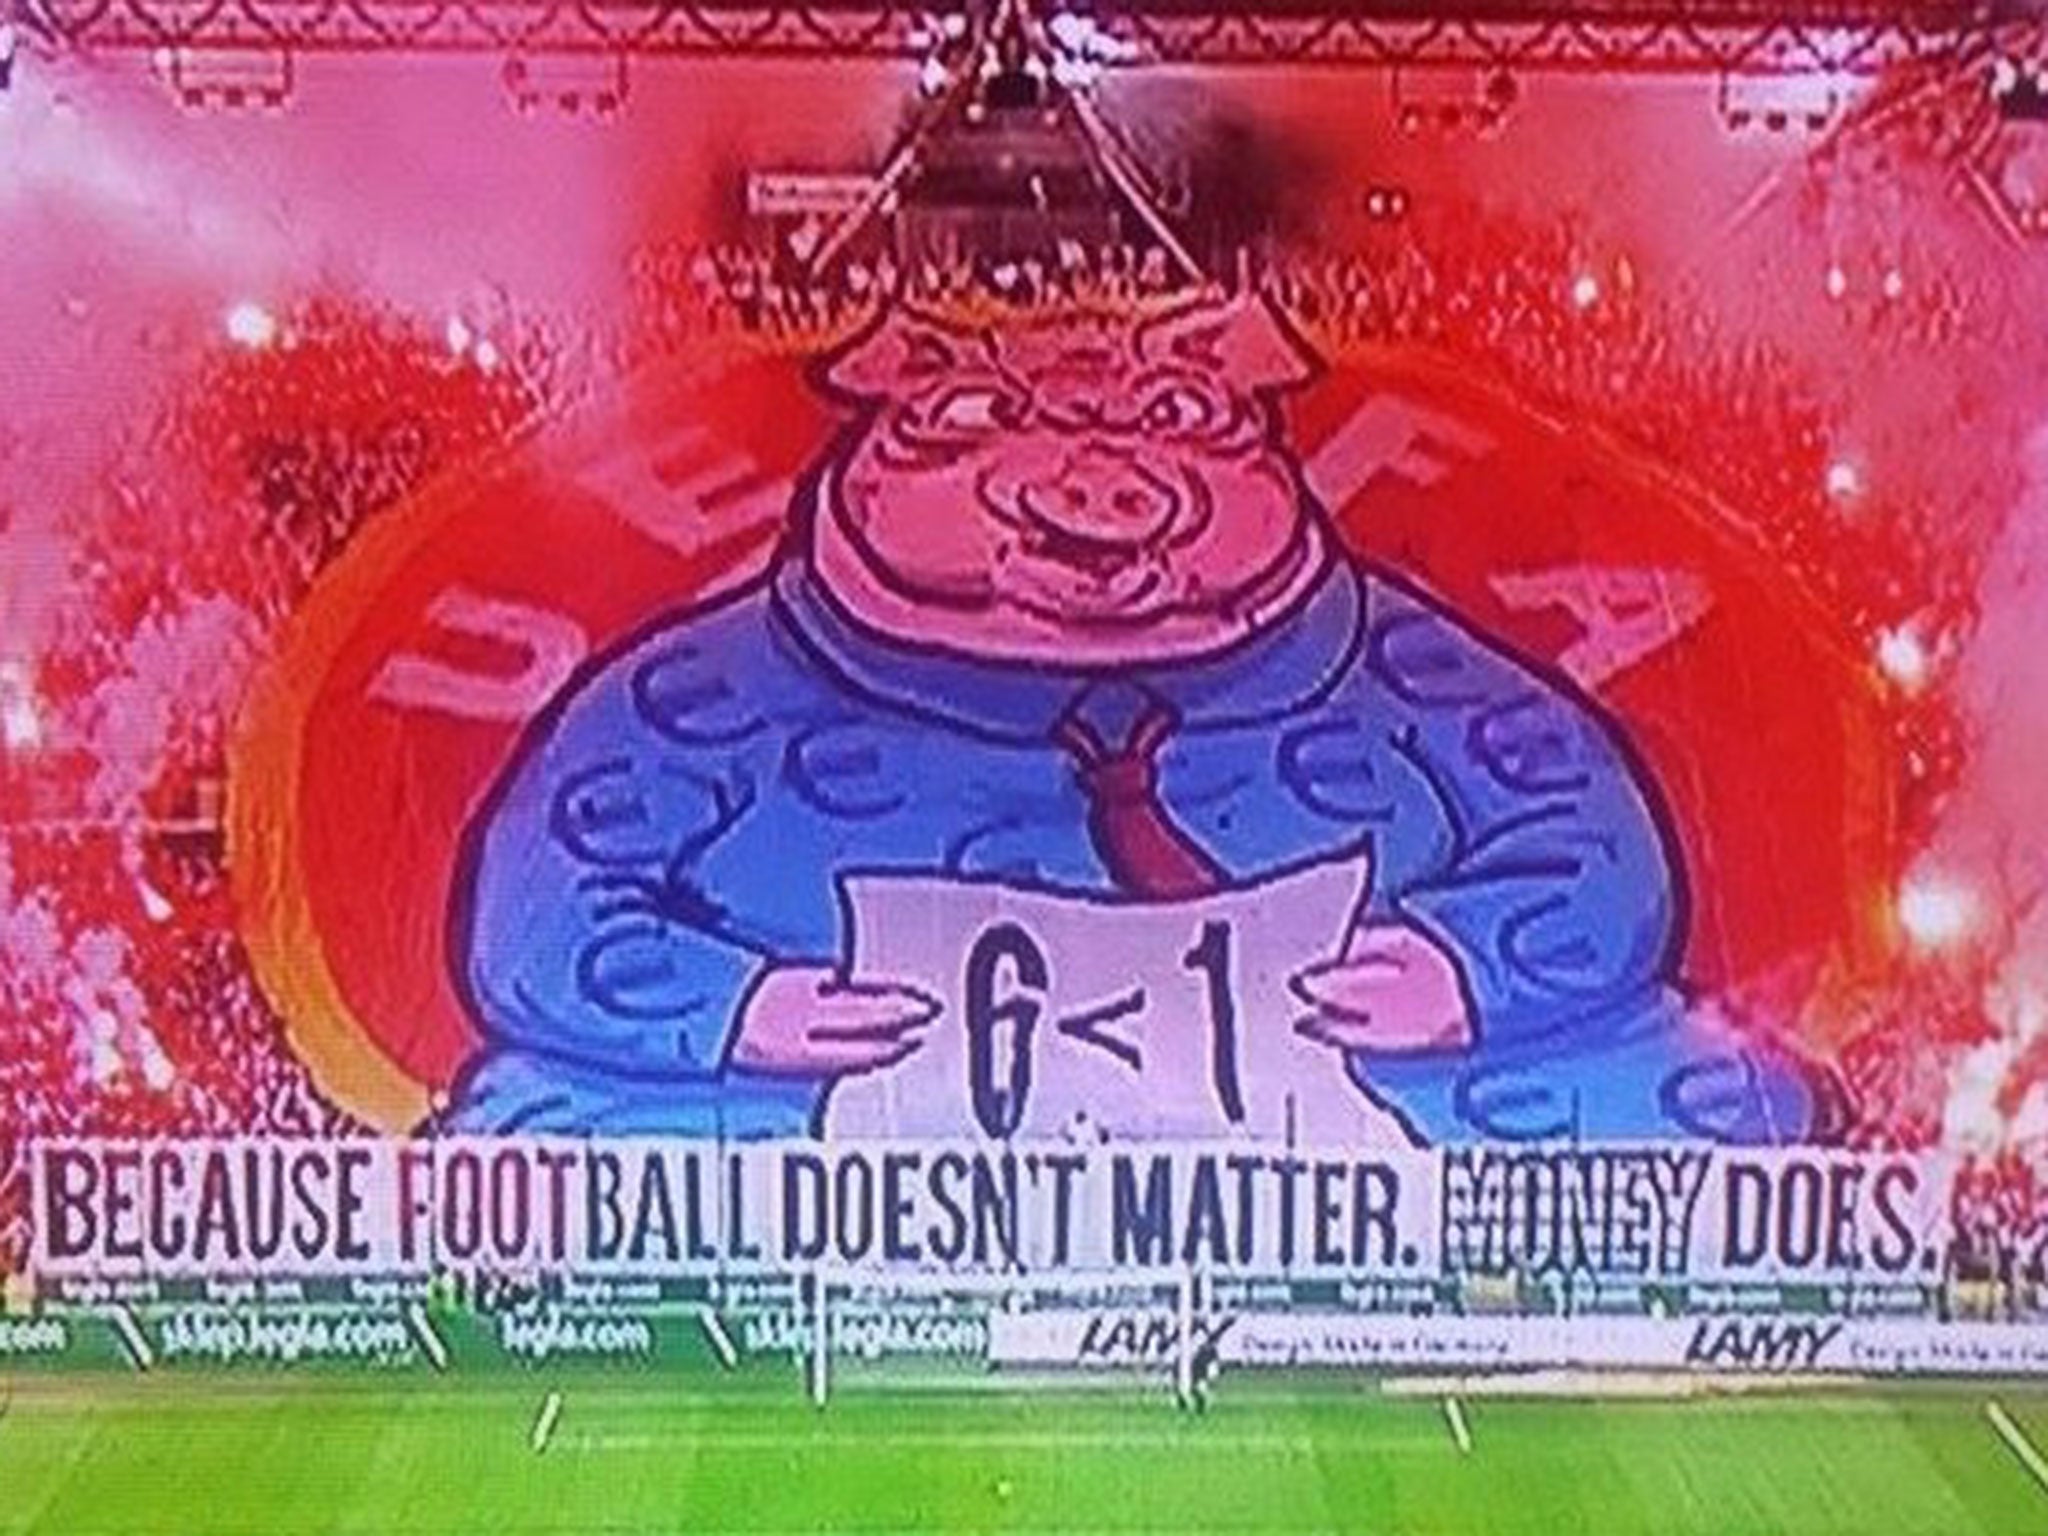 The giant banner displayed by Legia Warsaw supporters last night